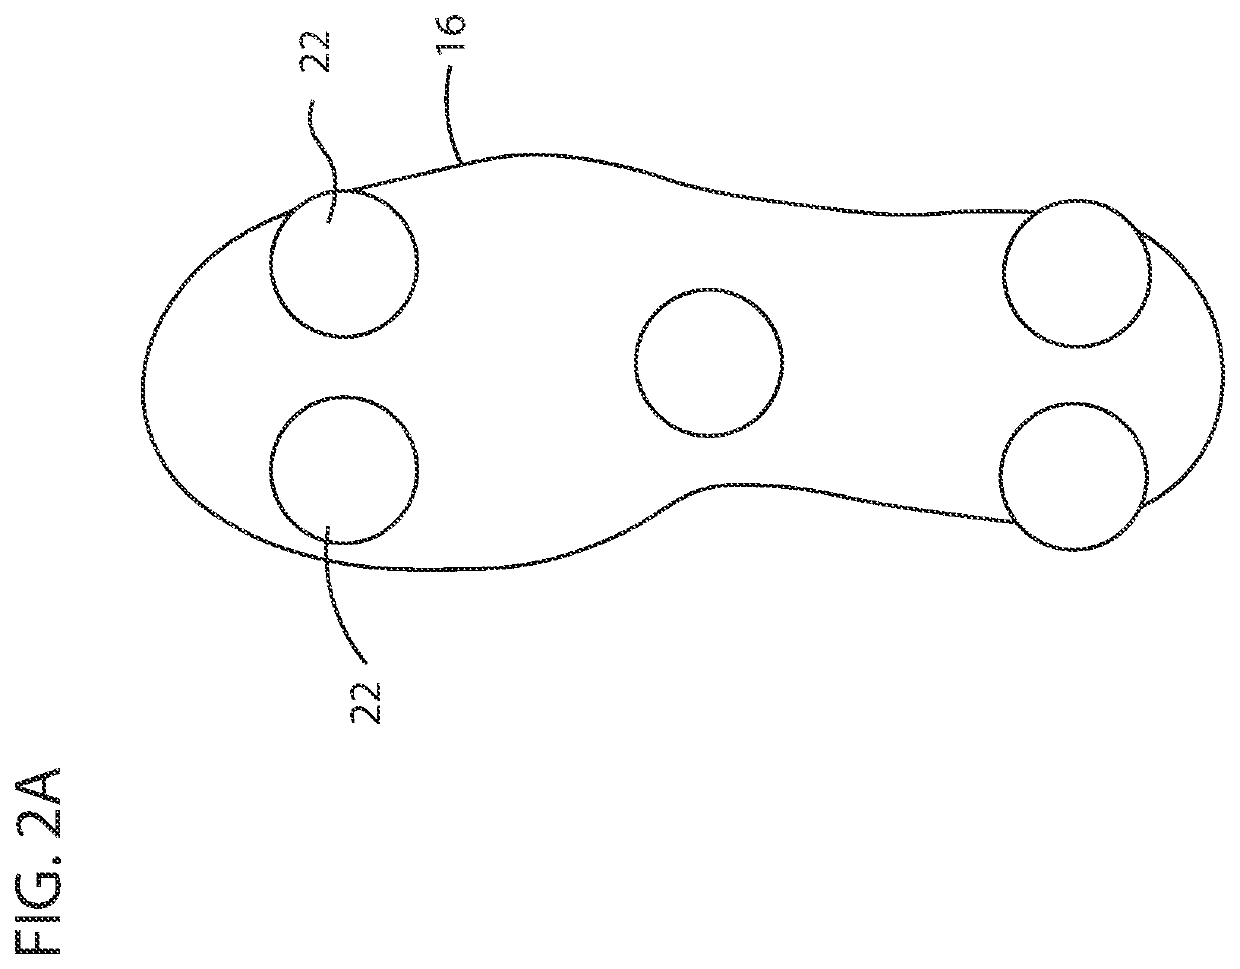 Uvc sanitation device and system for footwear and apparel and related methods